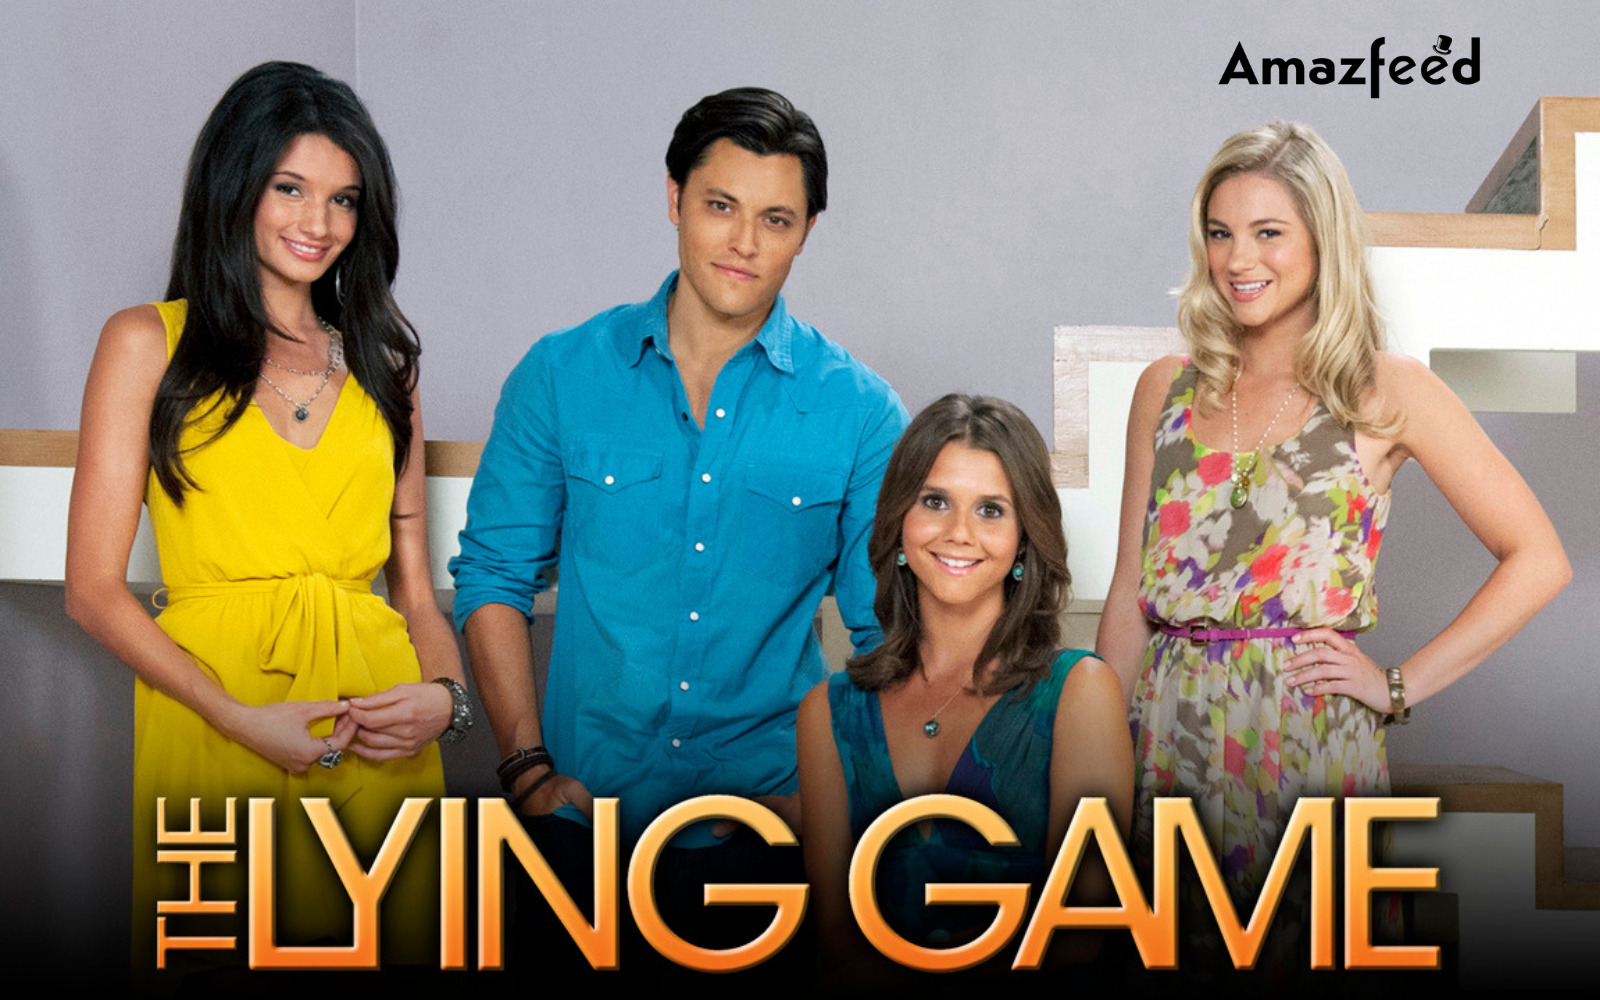 The Lying Game (2011-2013)